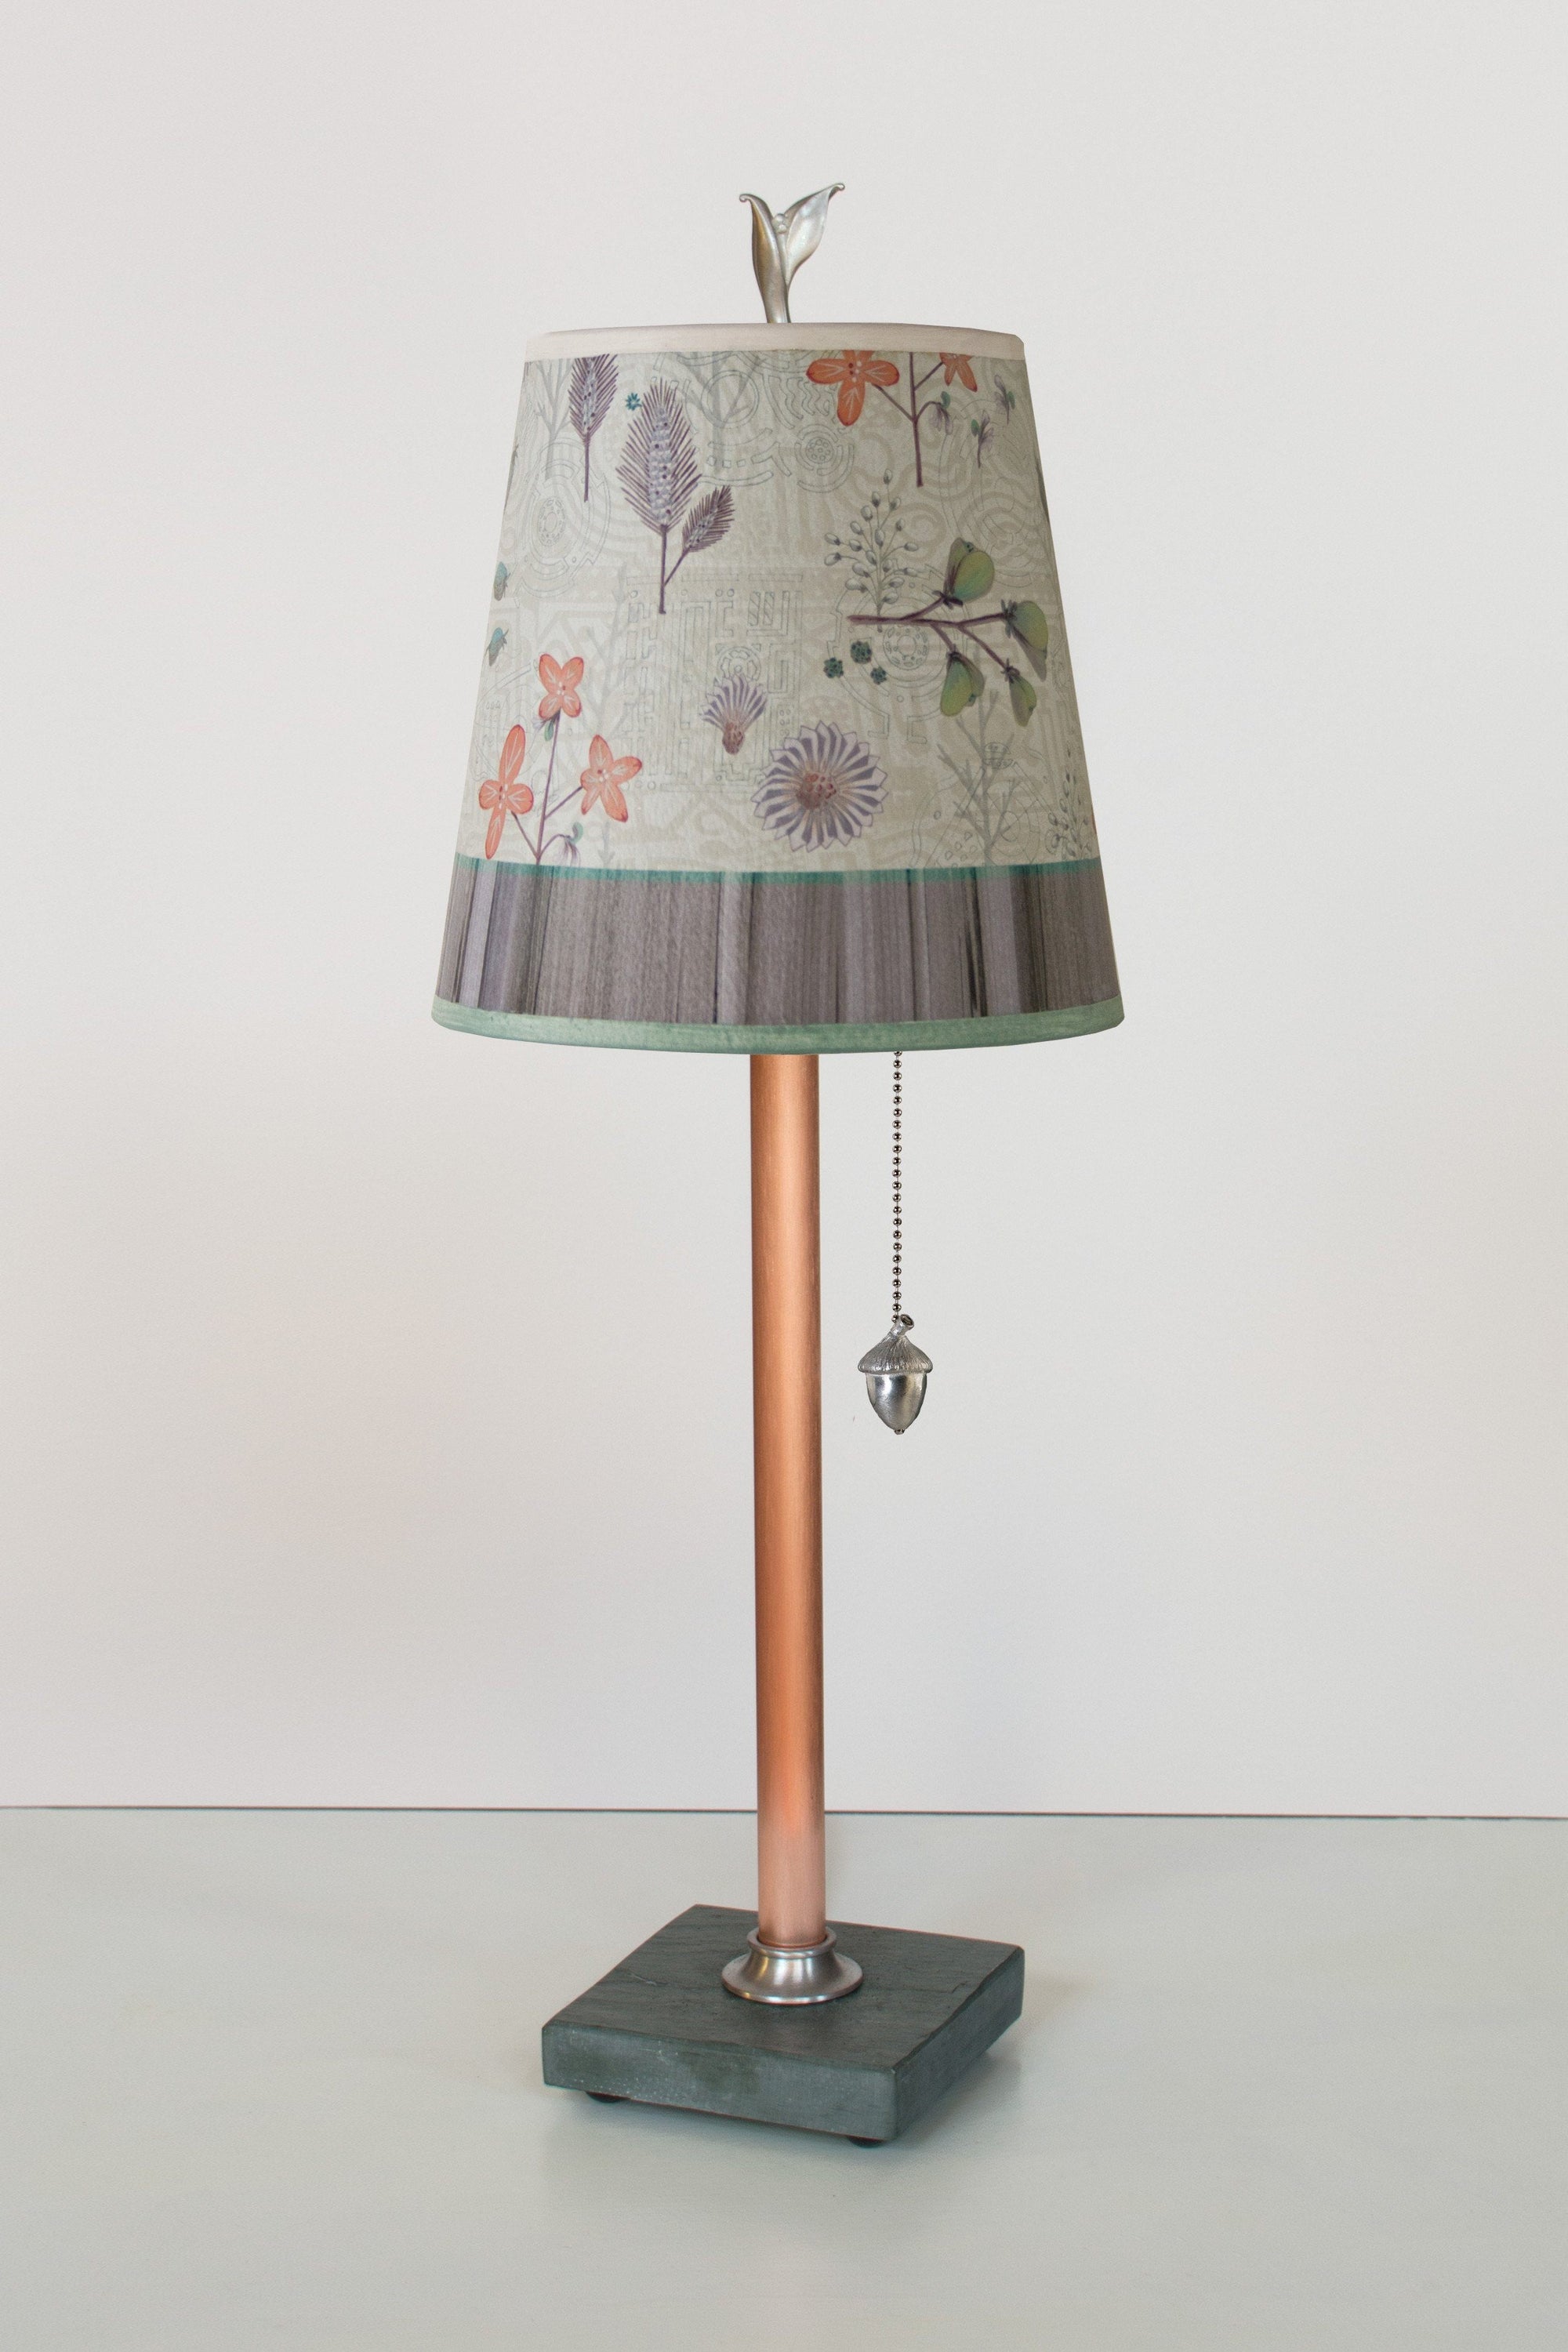 Janna Ugone & Co Table Lamps Copper Table Lamp with Small Drum Shade in Flora & Maze